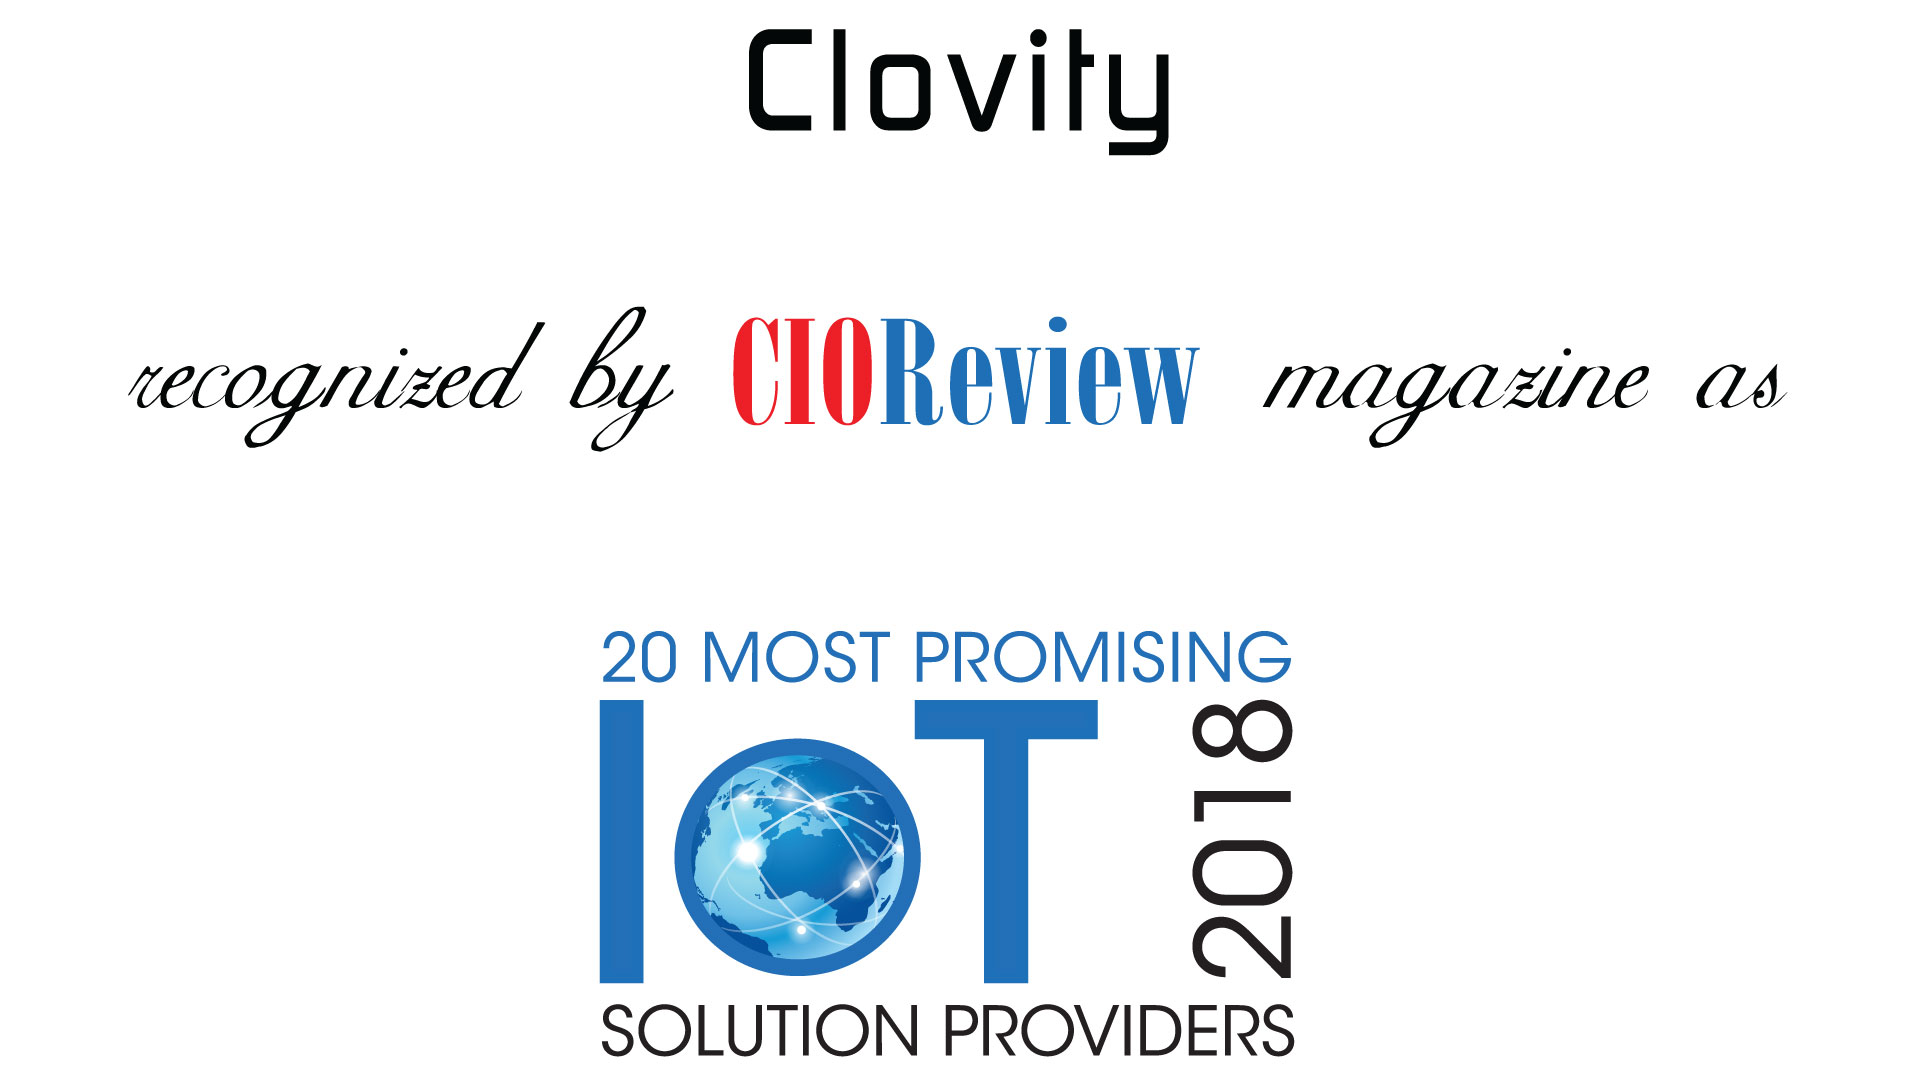 Clovity Named as the Global Top 20 IoT Solution Provider by CIO Magazine